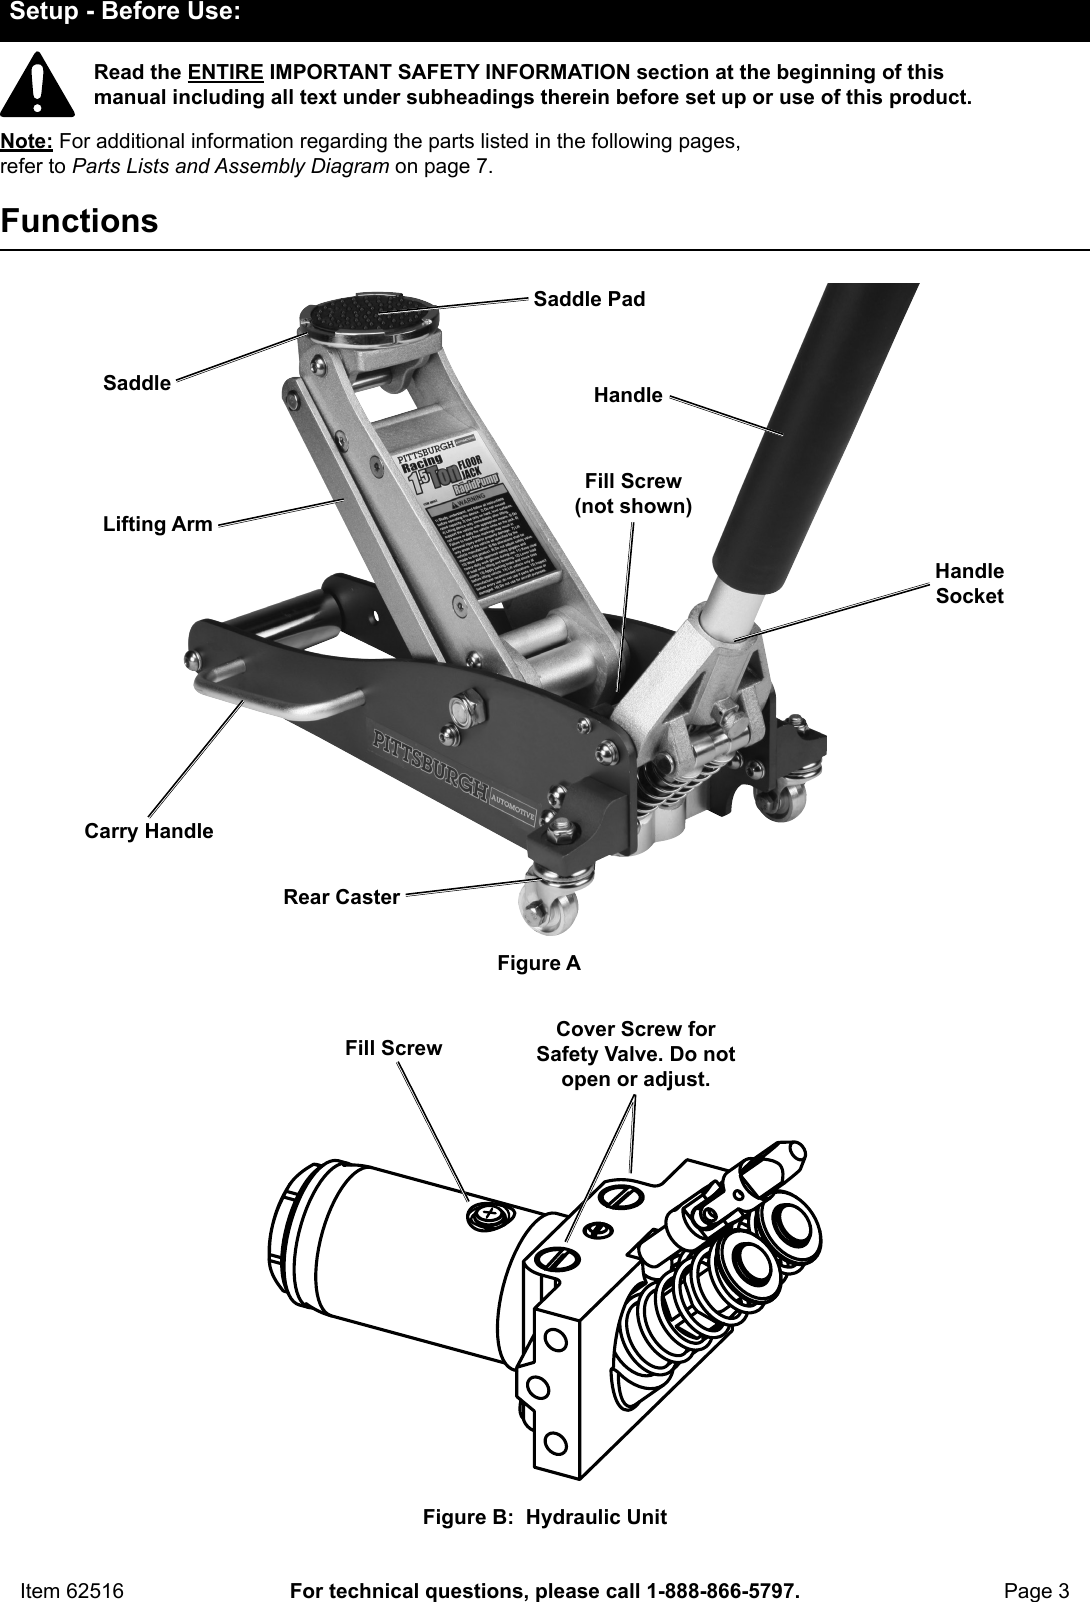 Page 3 of 8 - Manual For The 62516 1.5 Ton Compact Aluminum Racing Floor Jack With Rapid Pump®